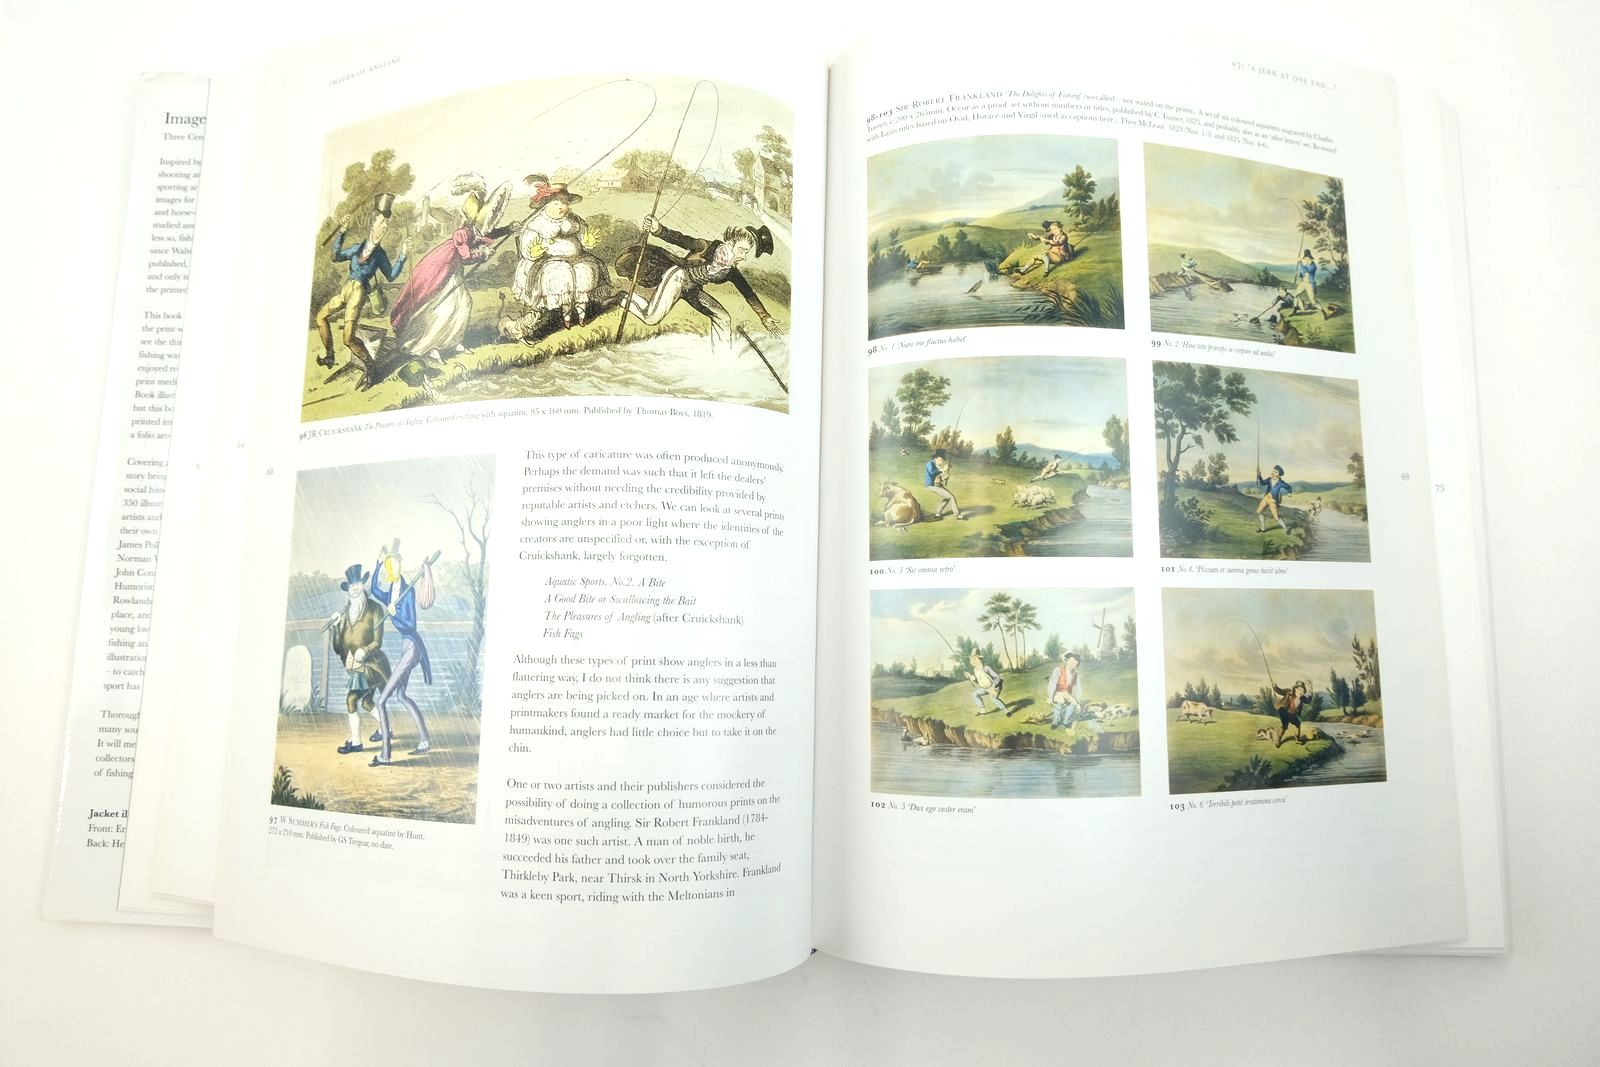 Photo of IMAGES OF ANGLING: AN ILLUSTRATED REVIEW OF THREE CENTURIES OF BRITISH ANGLING PRINTS written by Beazley, David published by Creel Press (STOCK CODE: 2139598)  for sale by Stella & Rose's Books